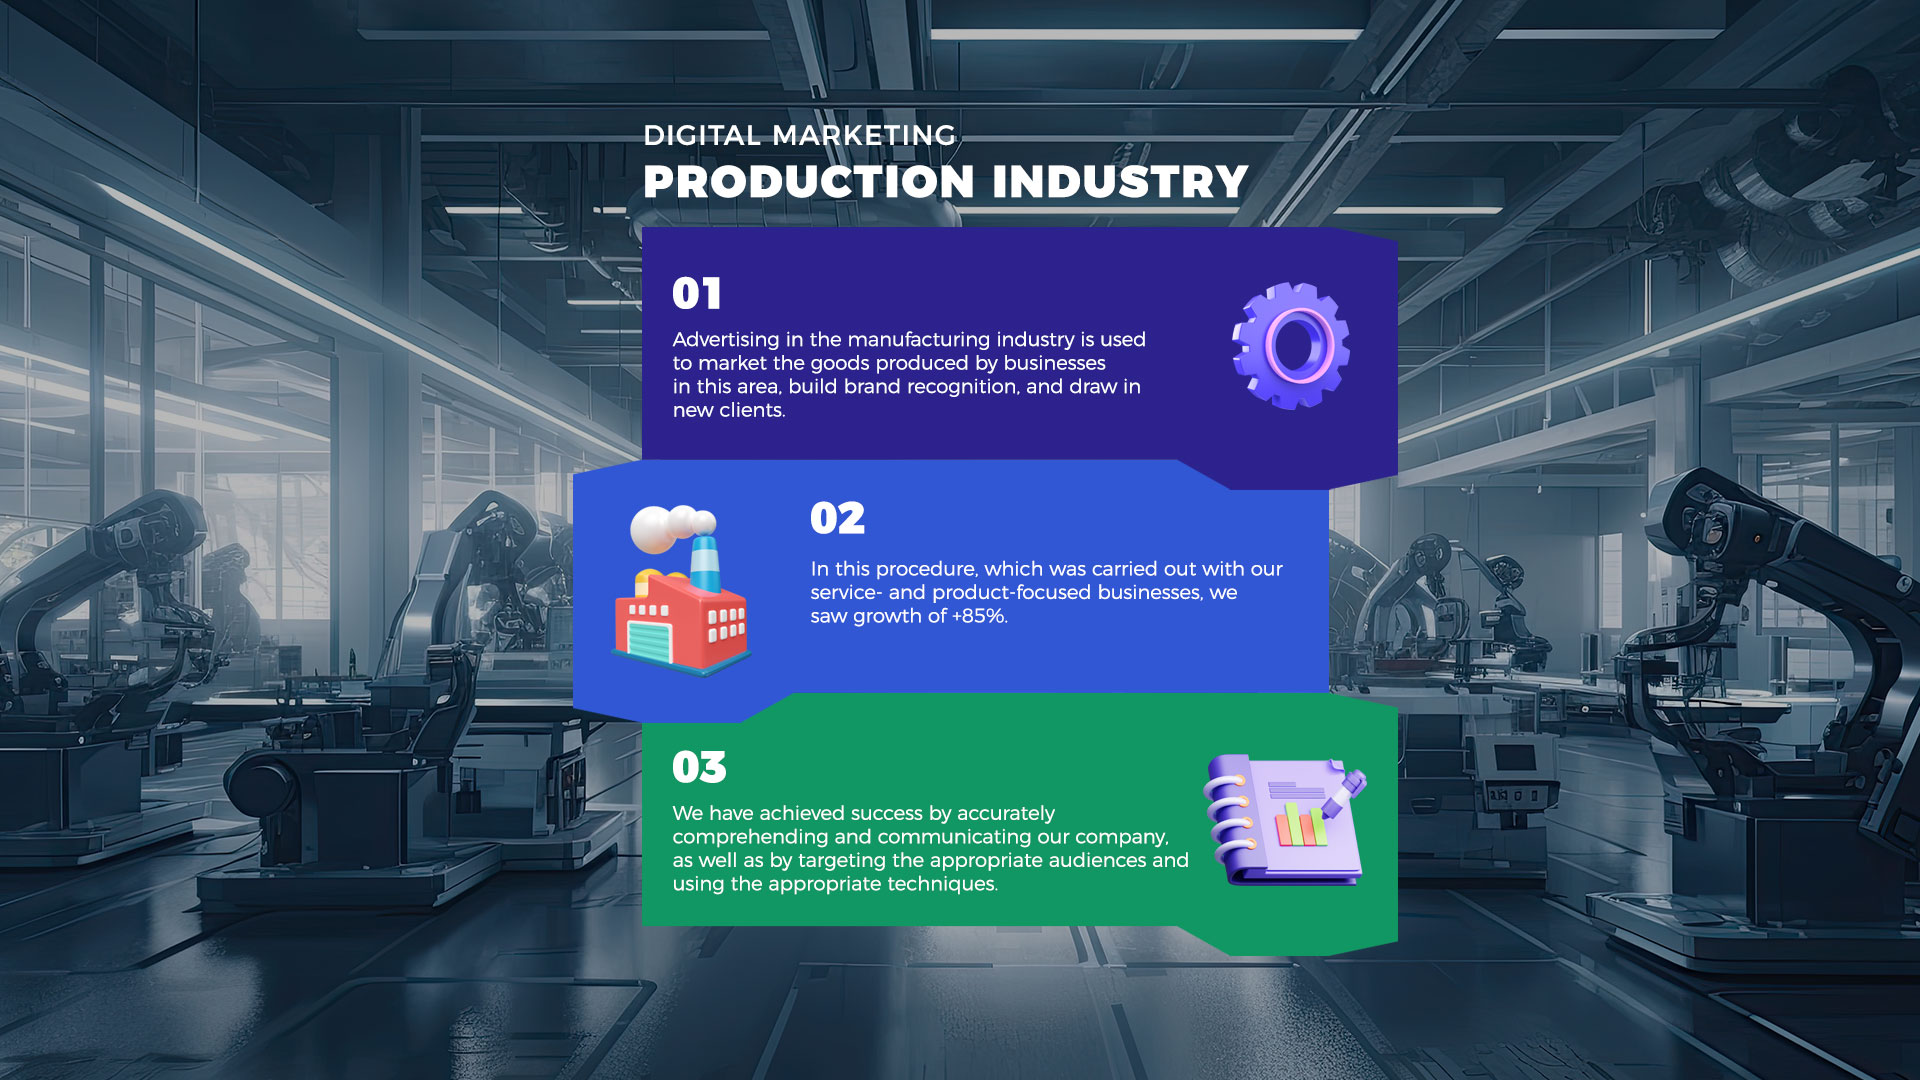 PRODUCTİON INDUSTRY